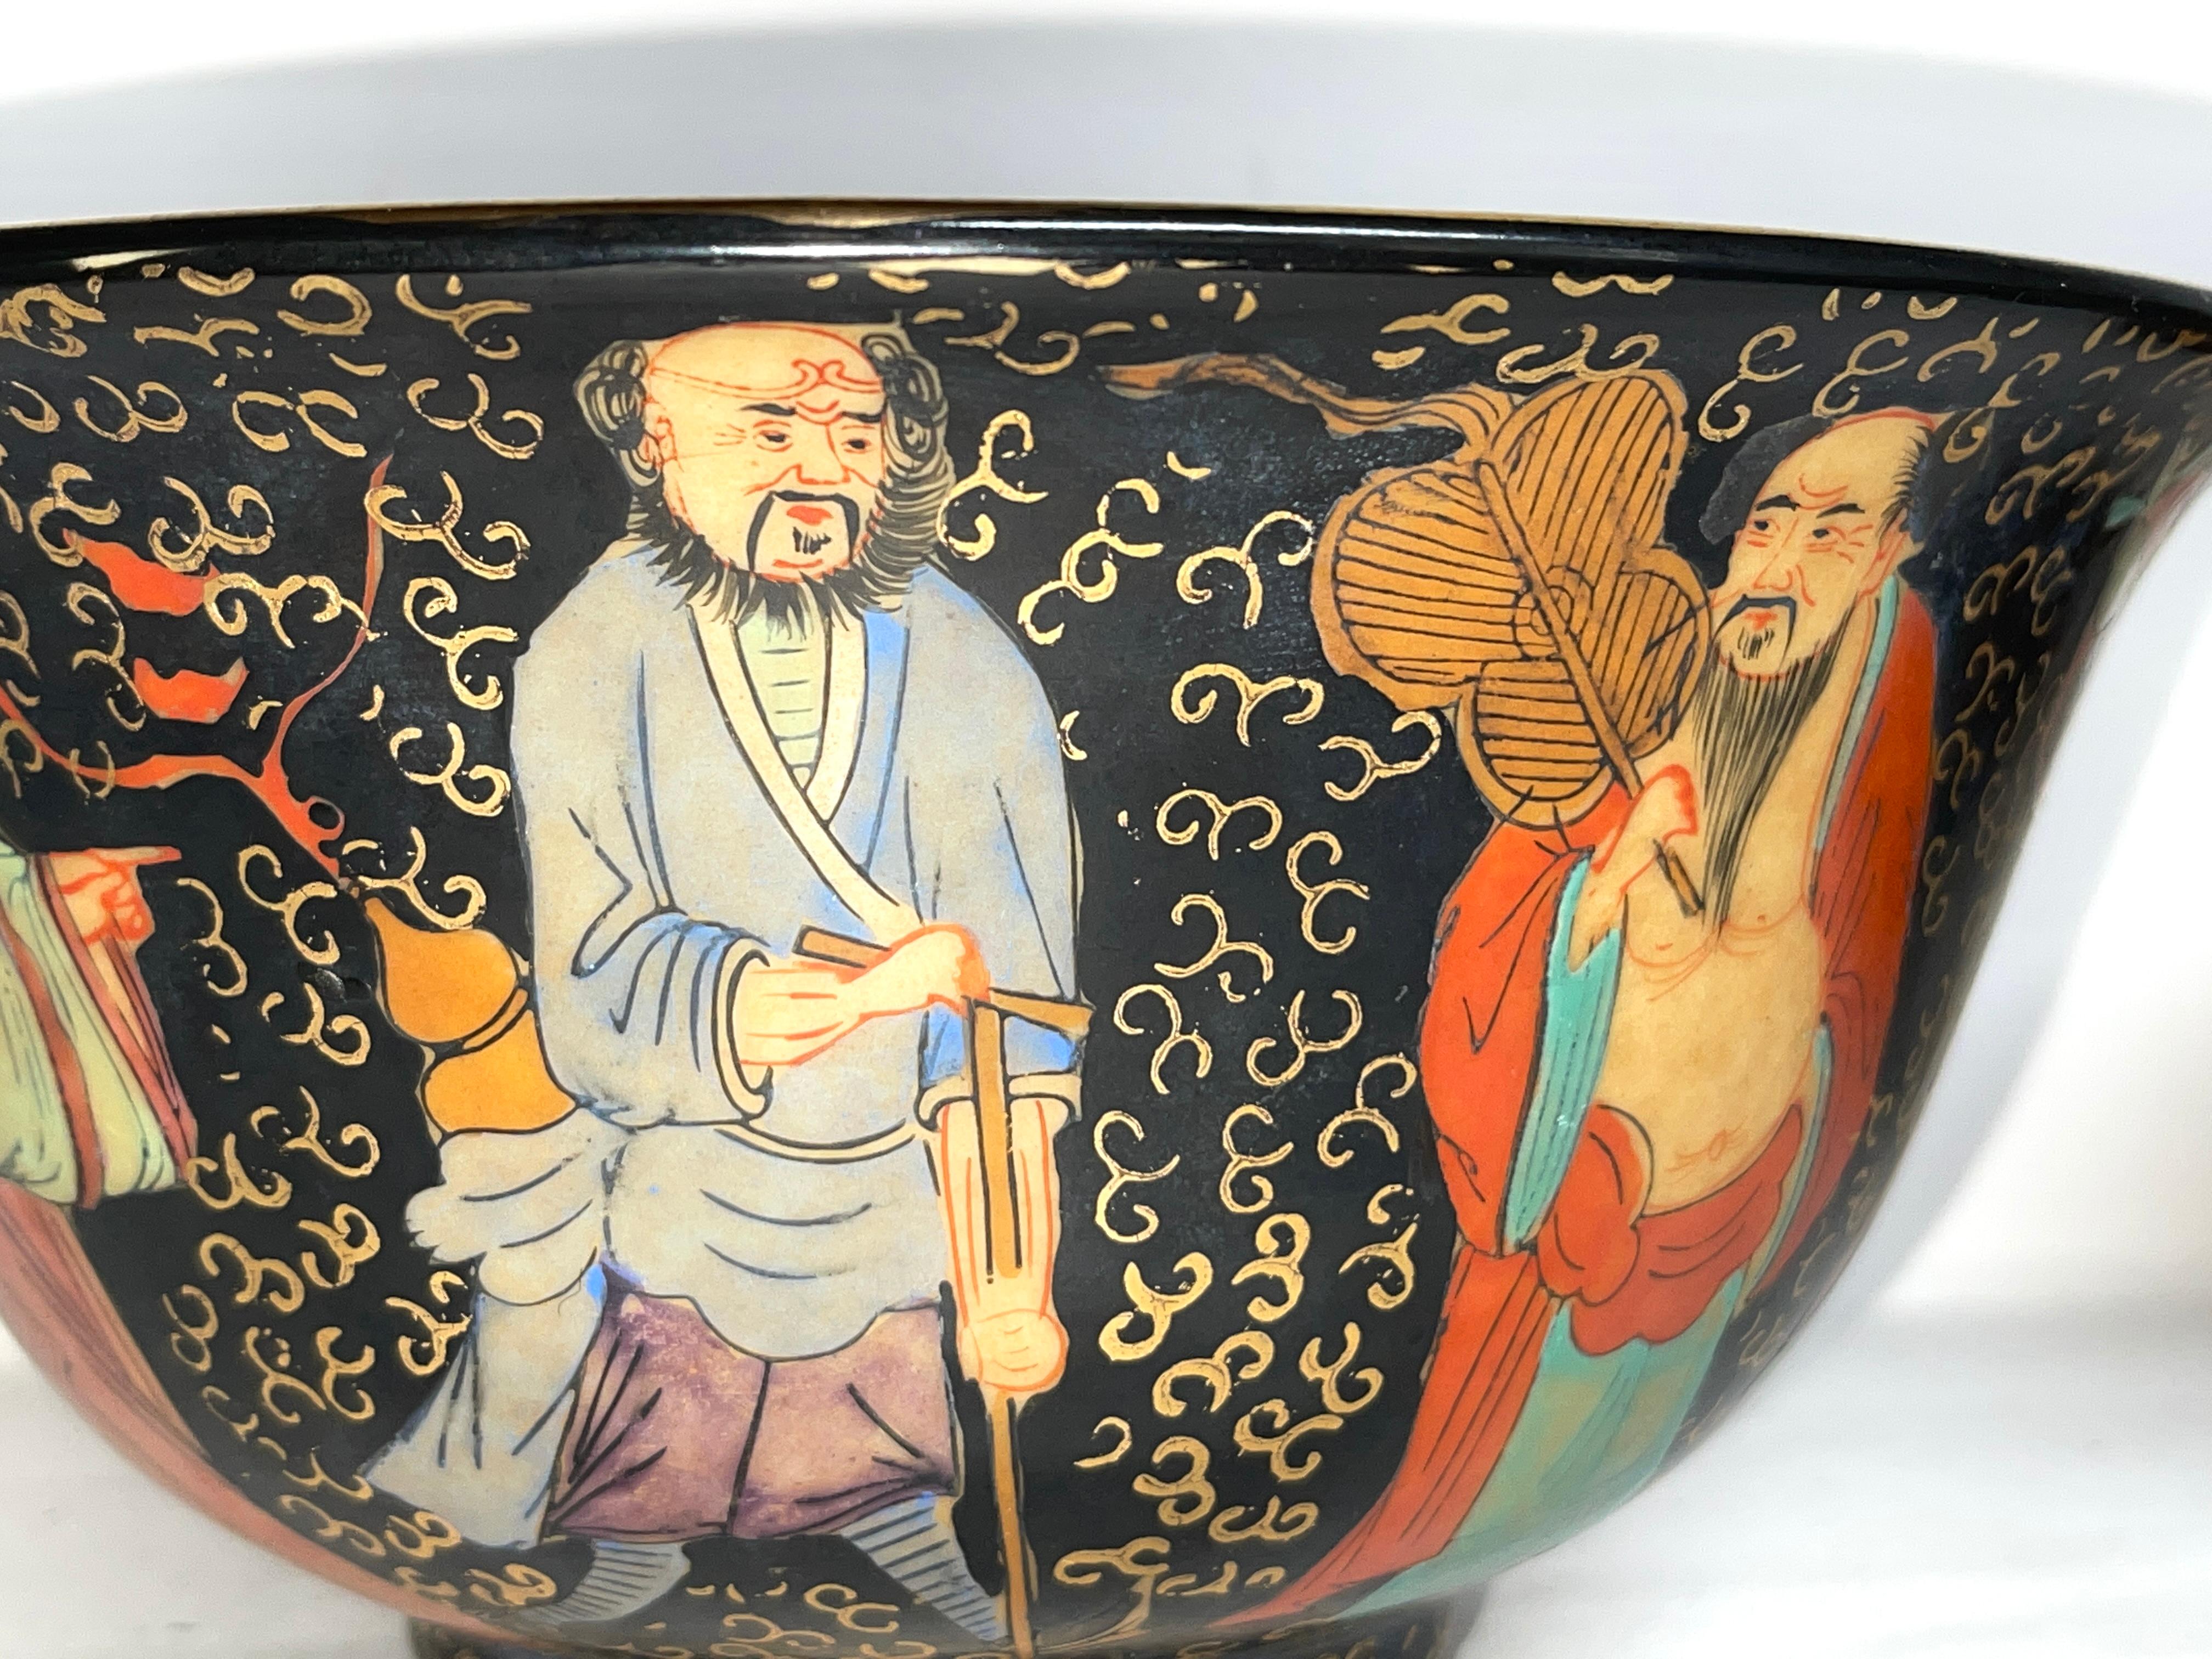 Pair of Antique Chinese Ceramic Bowls, 20th Century, Asian Art For Sale 10